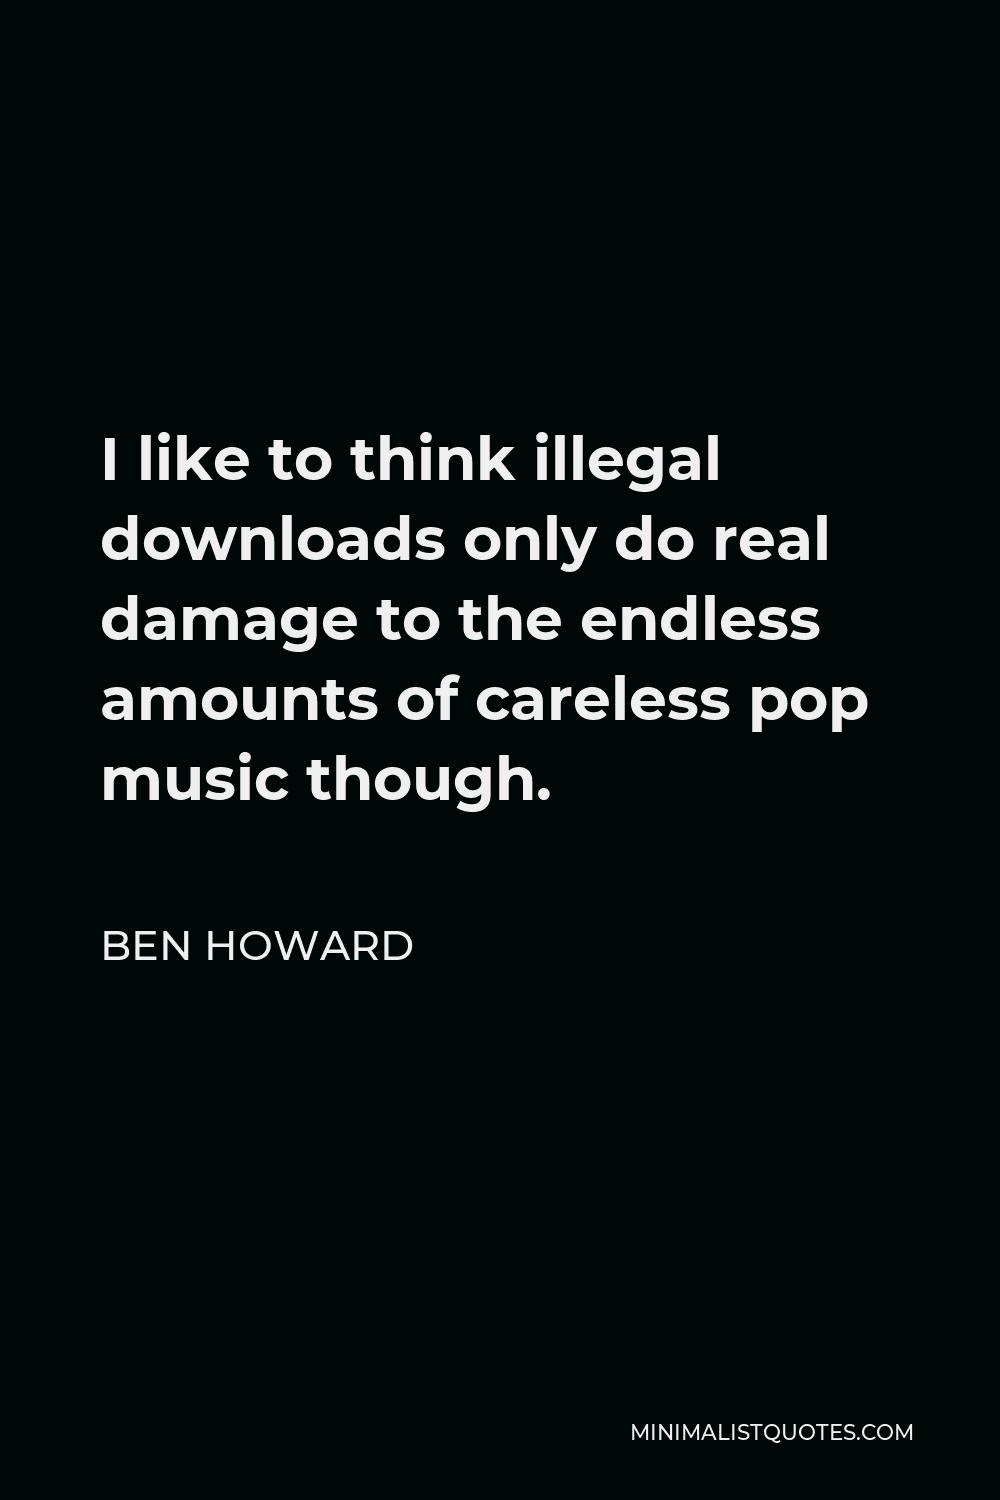 Ben Howard Quote - I like to think illegal downloads only do real damage to the endless amounts of careless pop music though.